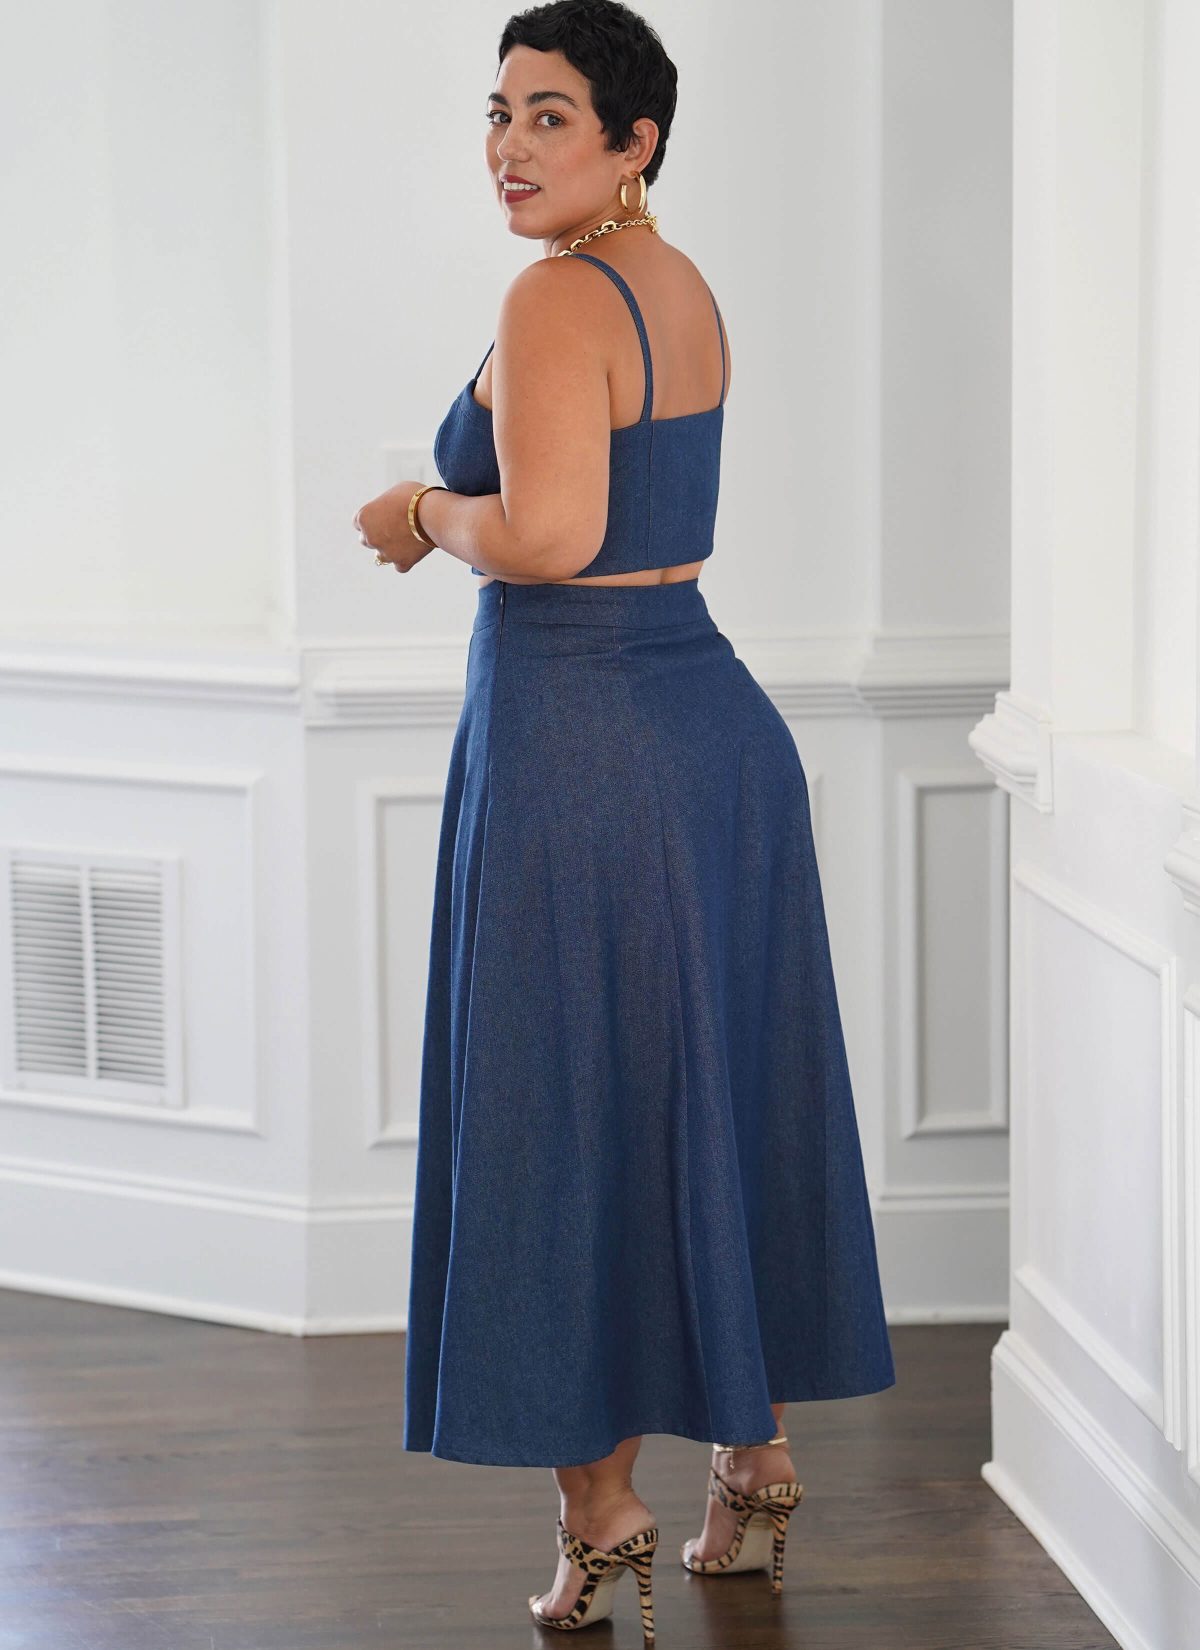 Simplicity Sewing Pattern S9894 Misses' and Women's Top and Skirt in Two Lengths By Mimi G Style